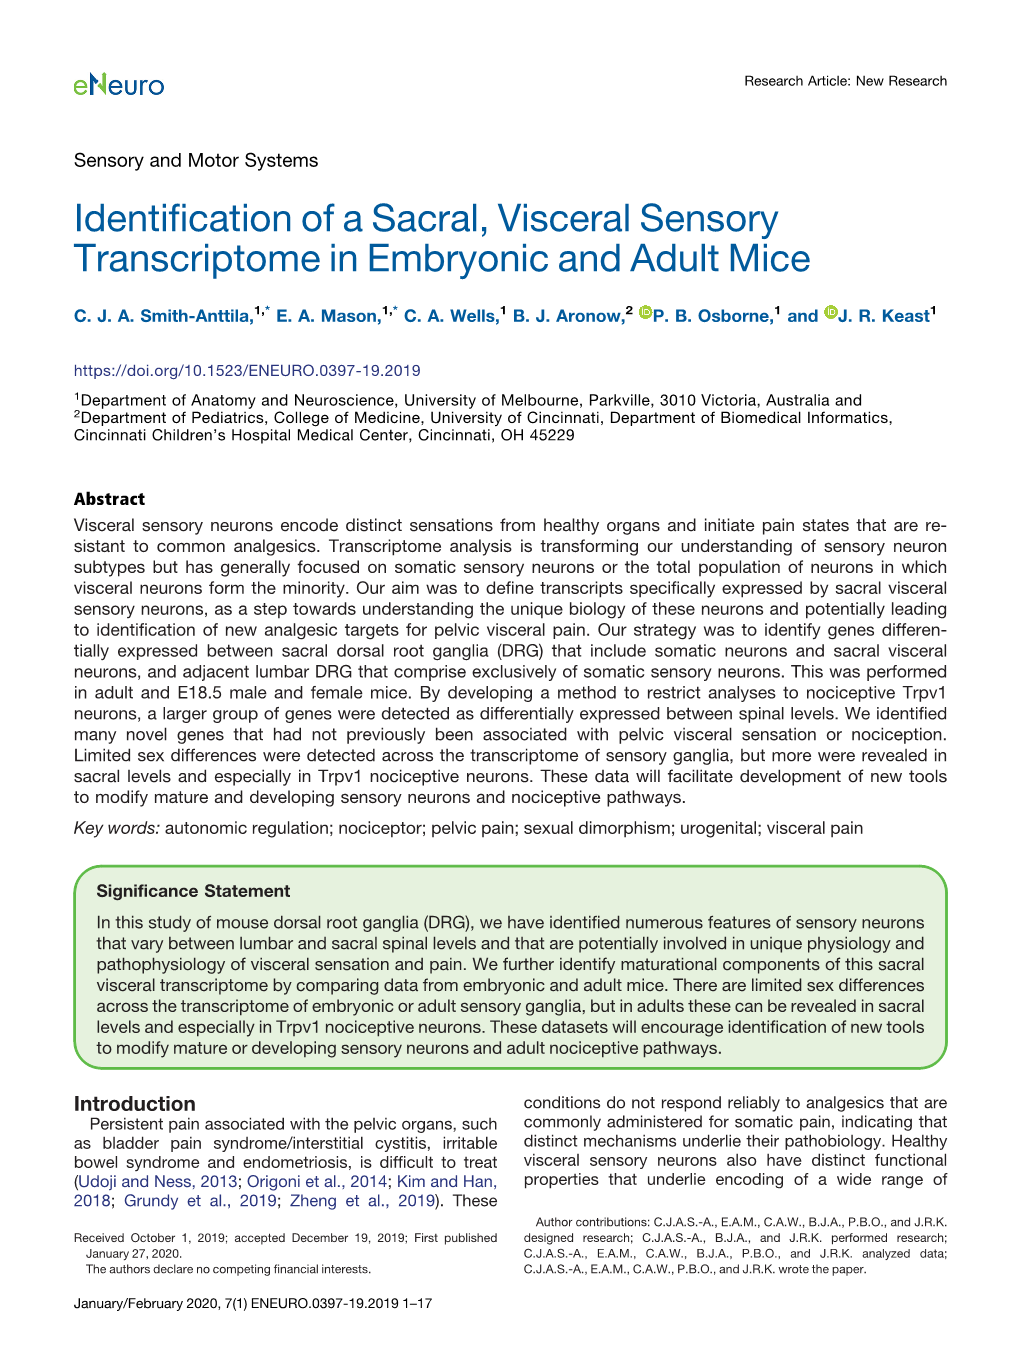 Identification of a Sacral, Visceral Sensory Transcriptome in Embryonic and Adult Mice